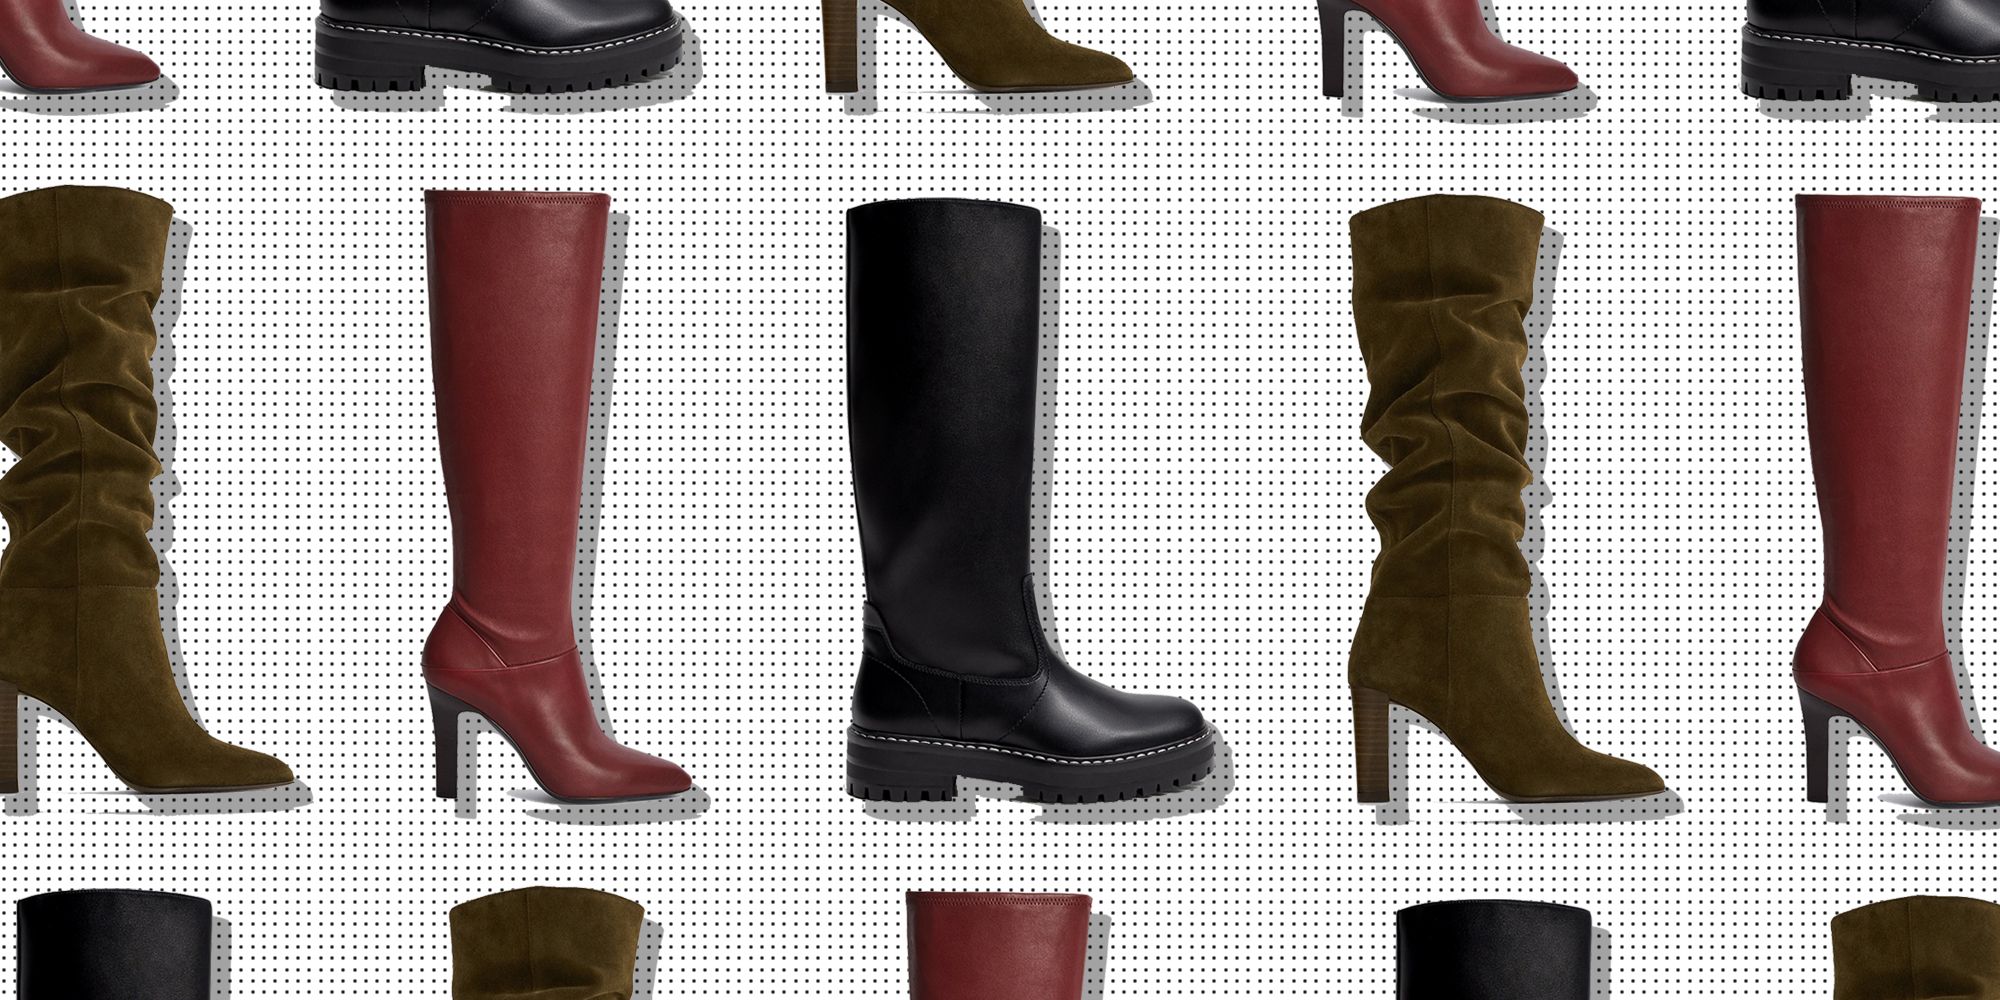 the best knee high boots